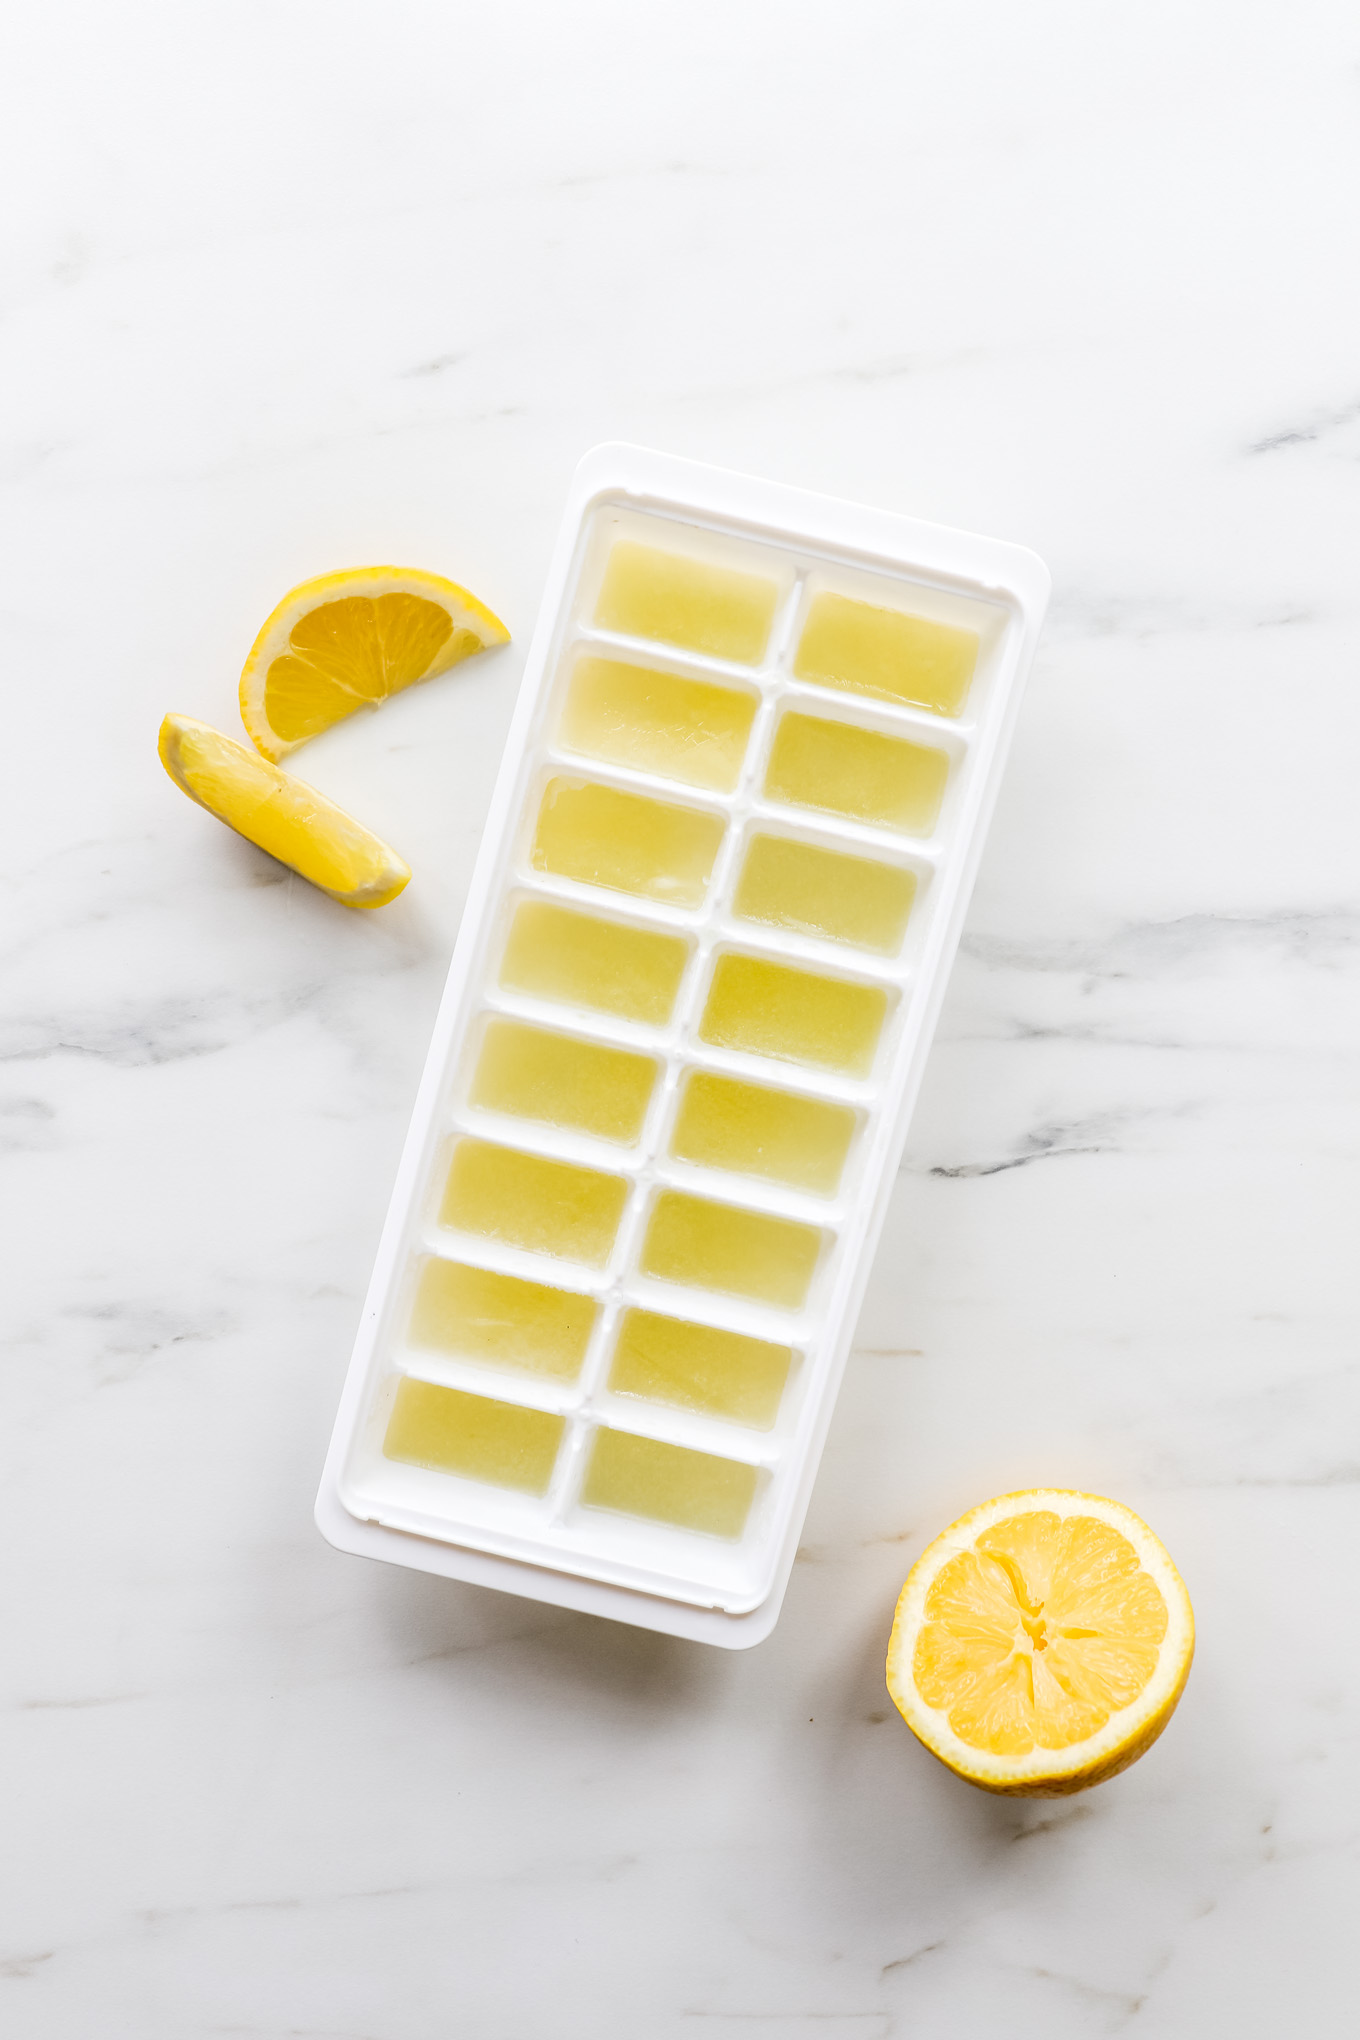 Freeze the juice from excess lemons